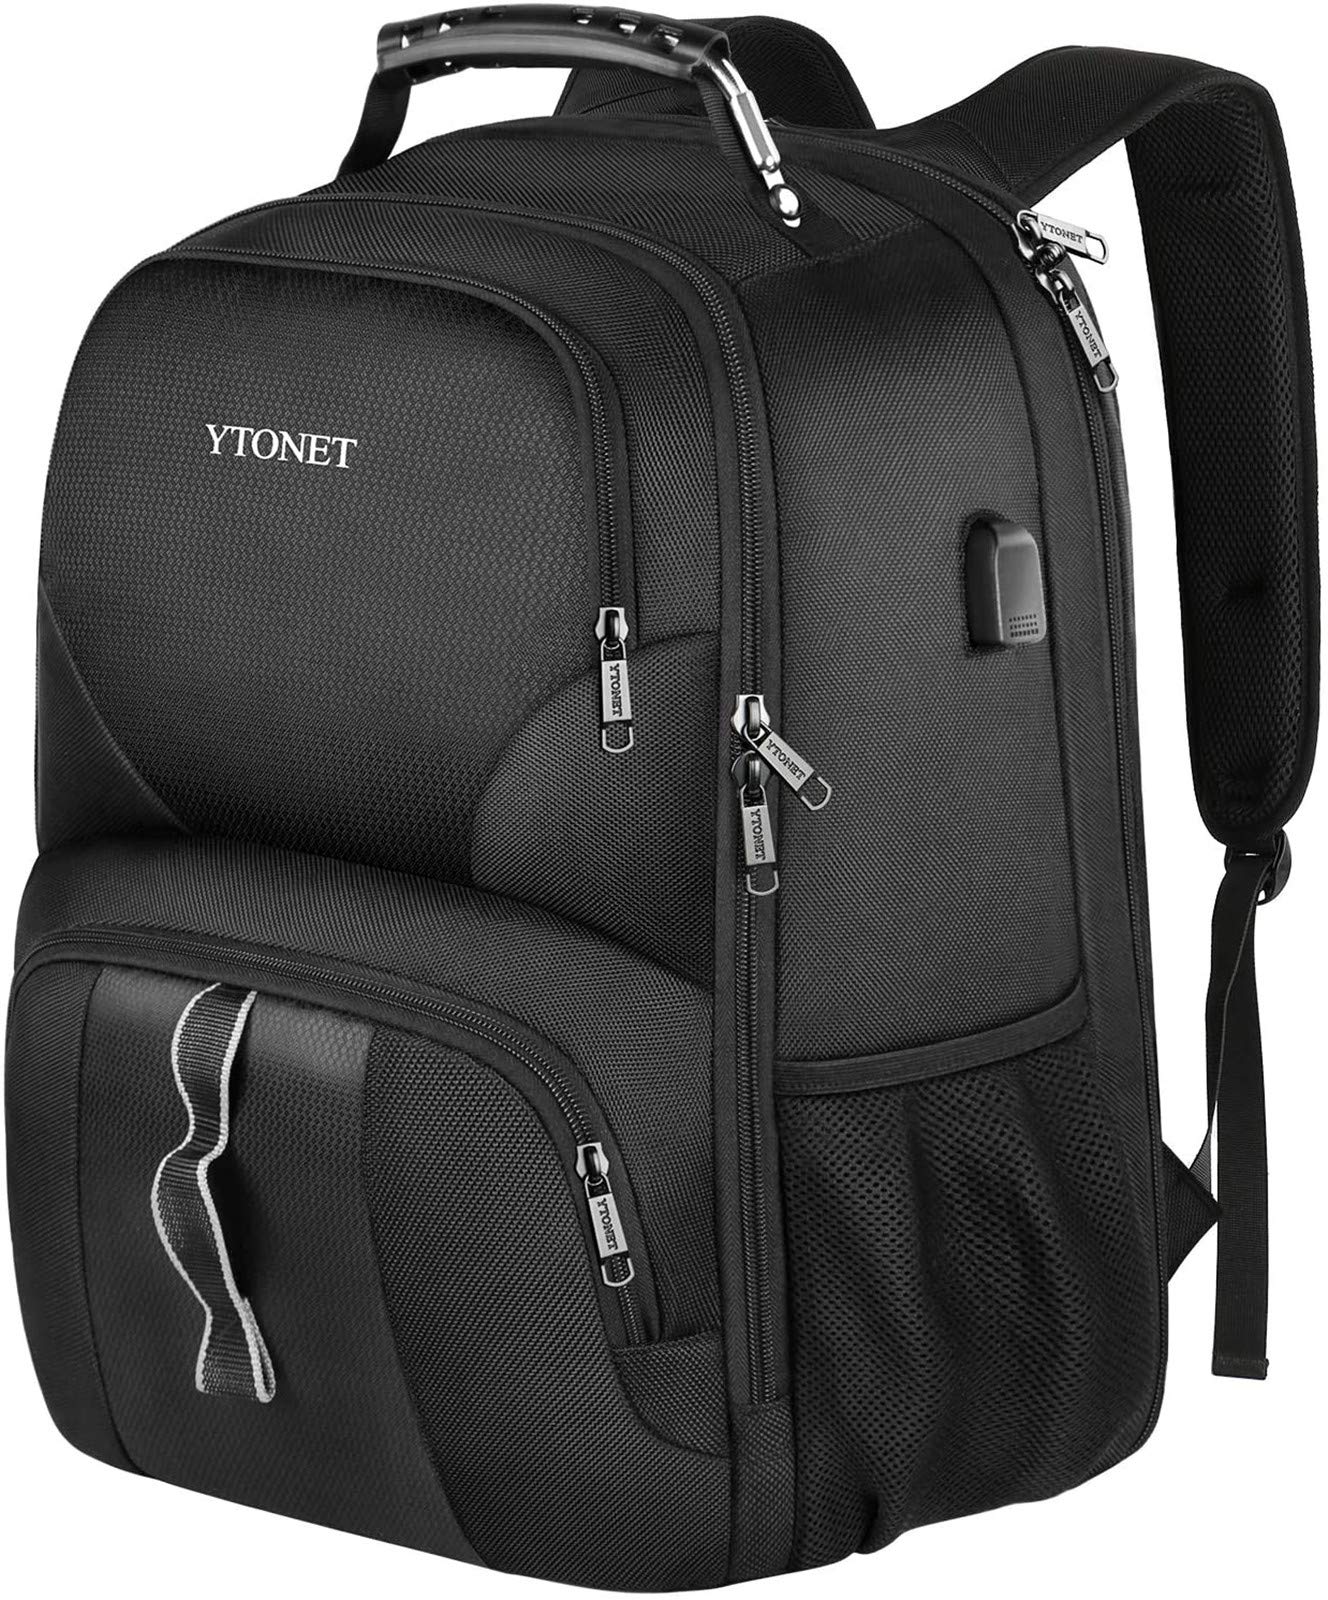 Ytonet Travel Laptop Backpack, 17 Inch TSA Large Travel Backpack for Men Business Carry on Backpack with Luggage Sleeve College School Bookbag, Black